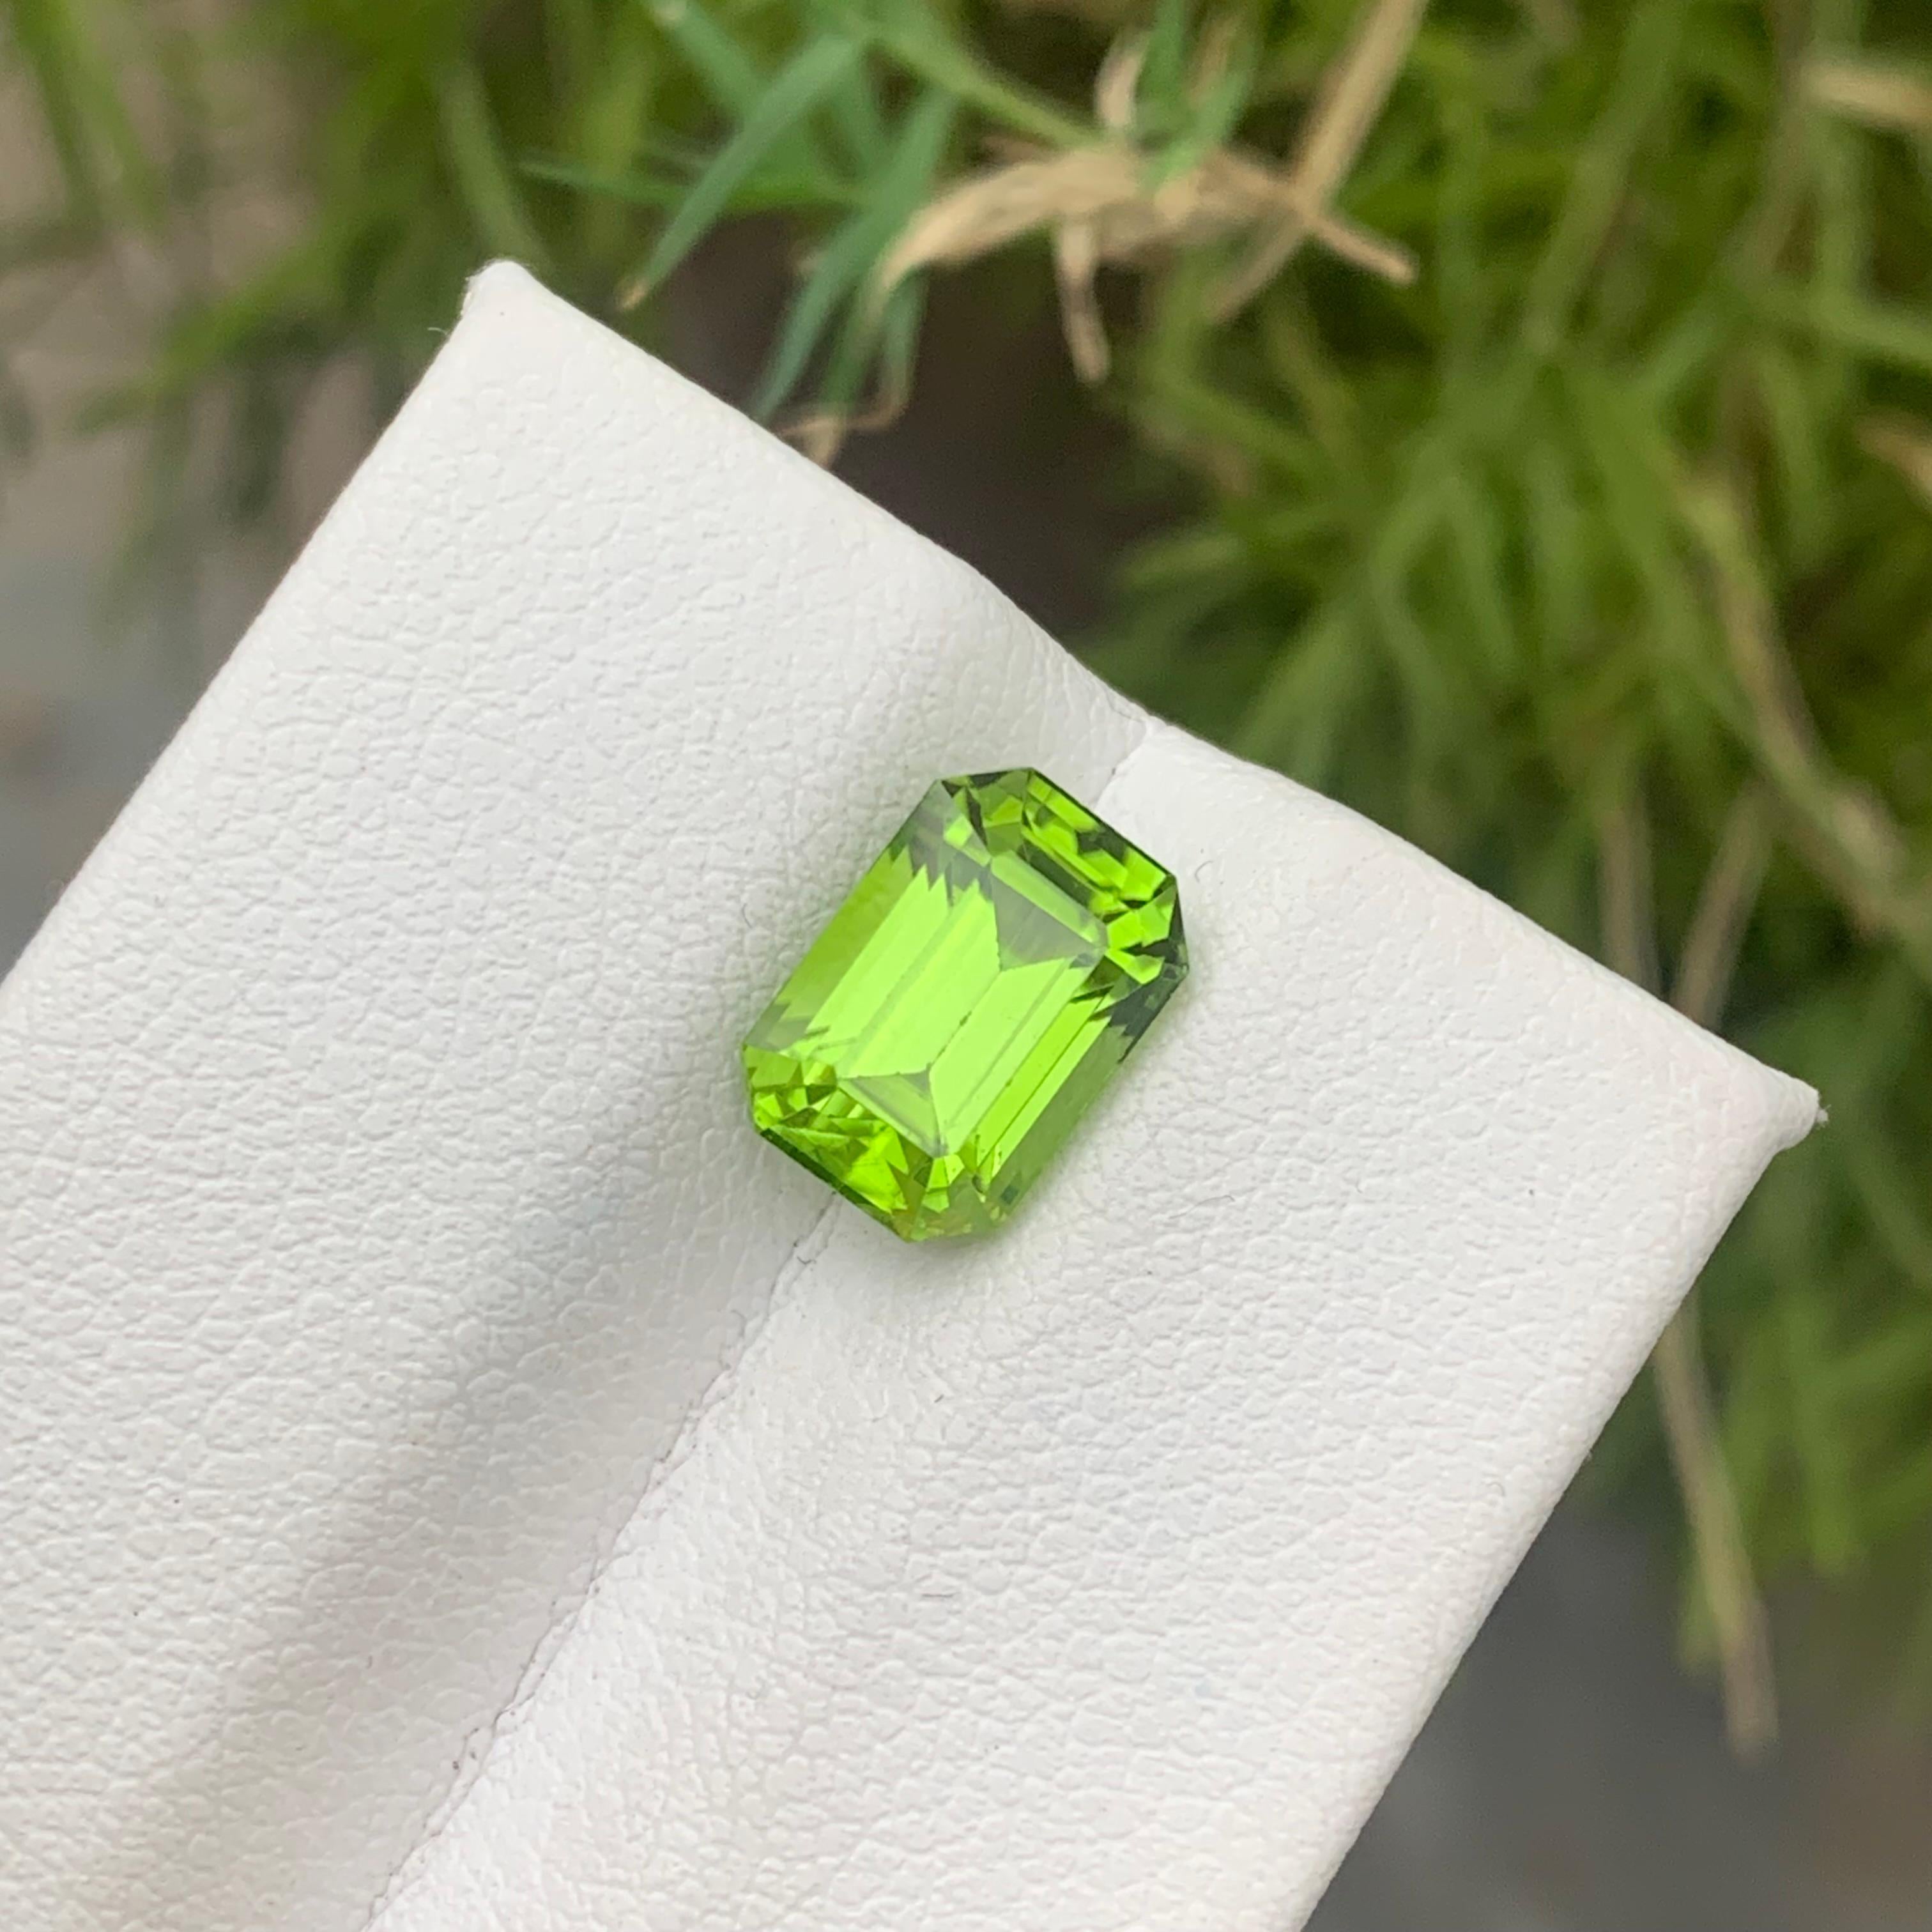 Gemstone Type : Peridot
Weight : 3.35 Carats
Dimension: 9.6x6.8x5.9 Mm 
Origin : Suppat Valley Pakistan
Clarity : Clean
Certificate: On Demand
Color: Green
Treatment: Non
Shape: Emerald
It helps cure diseases related to lungs, breasts, intestinal